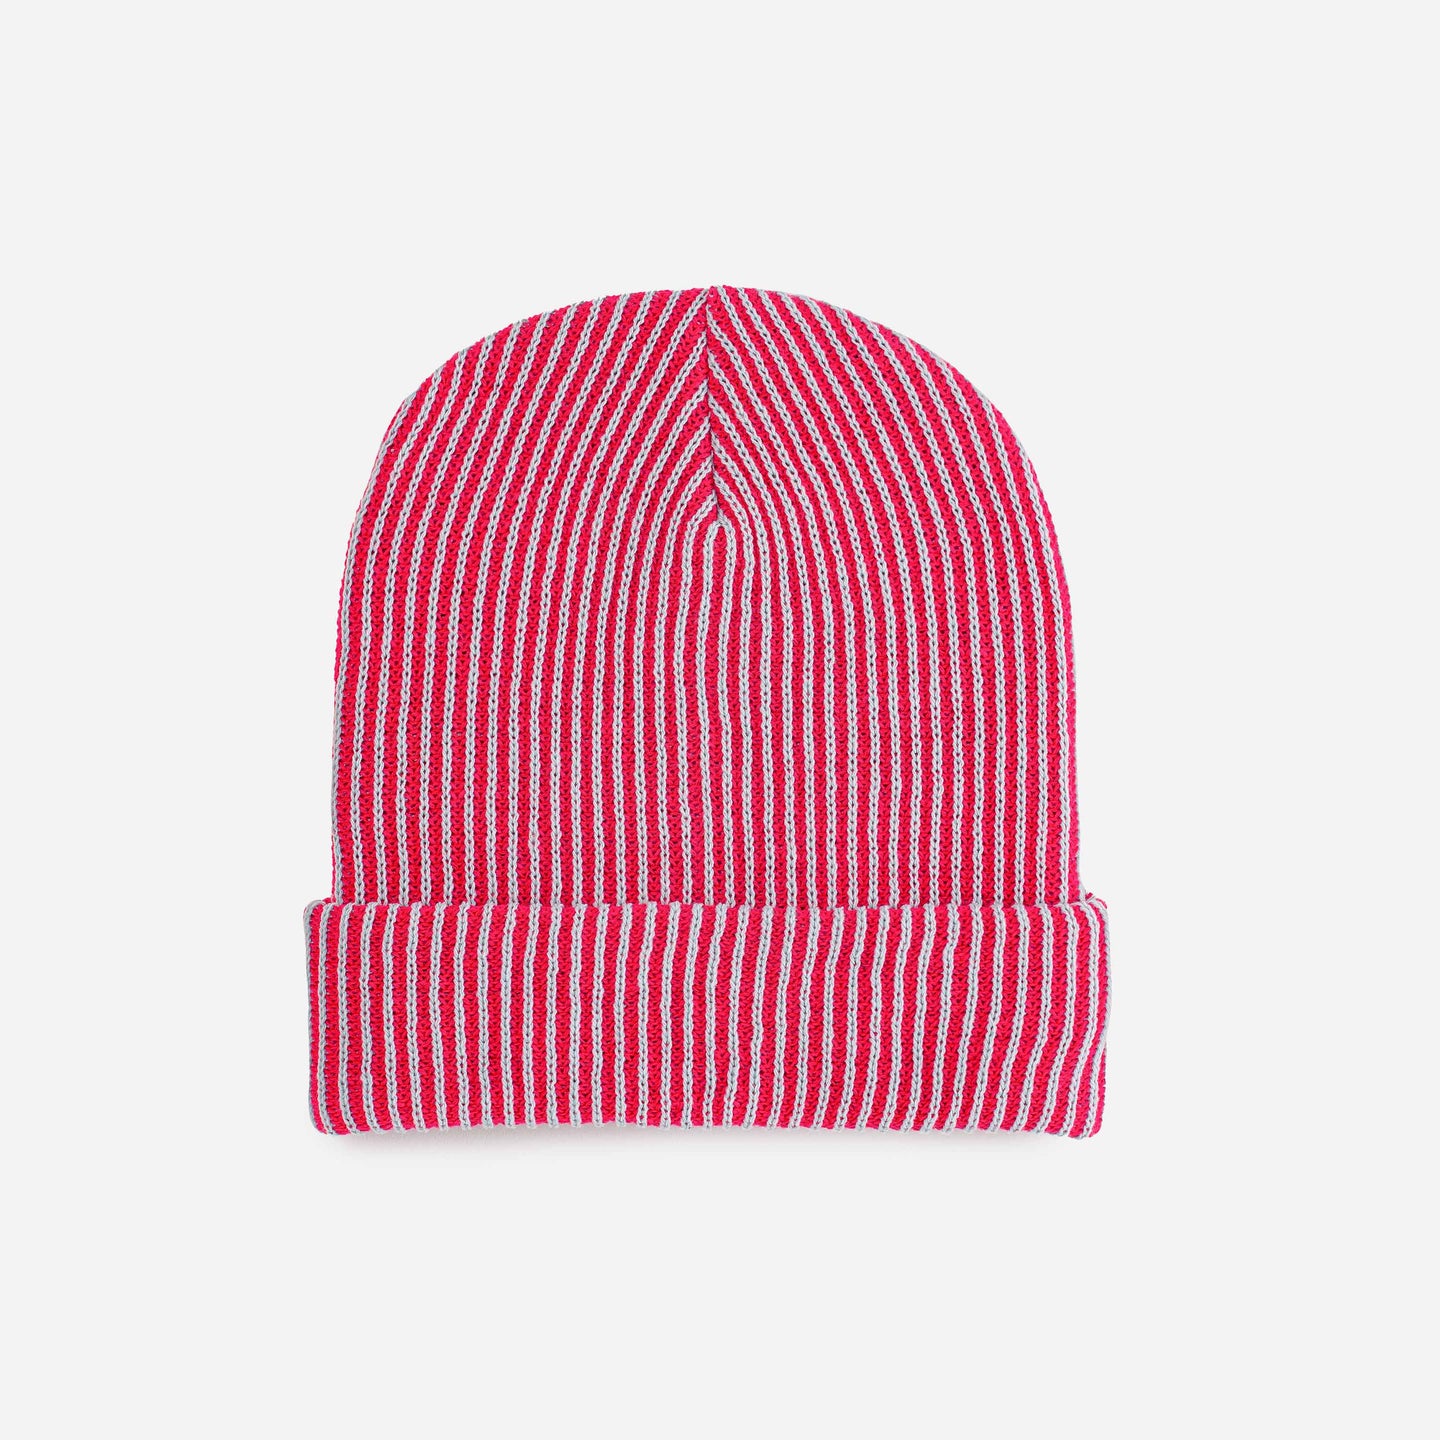 Simple Rib Hat Knit Striped Slouchy Cap fit big heads